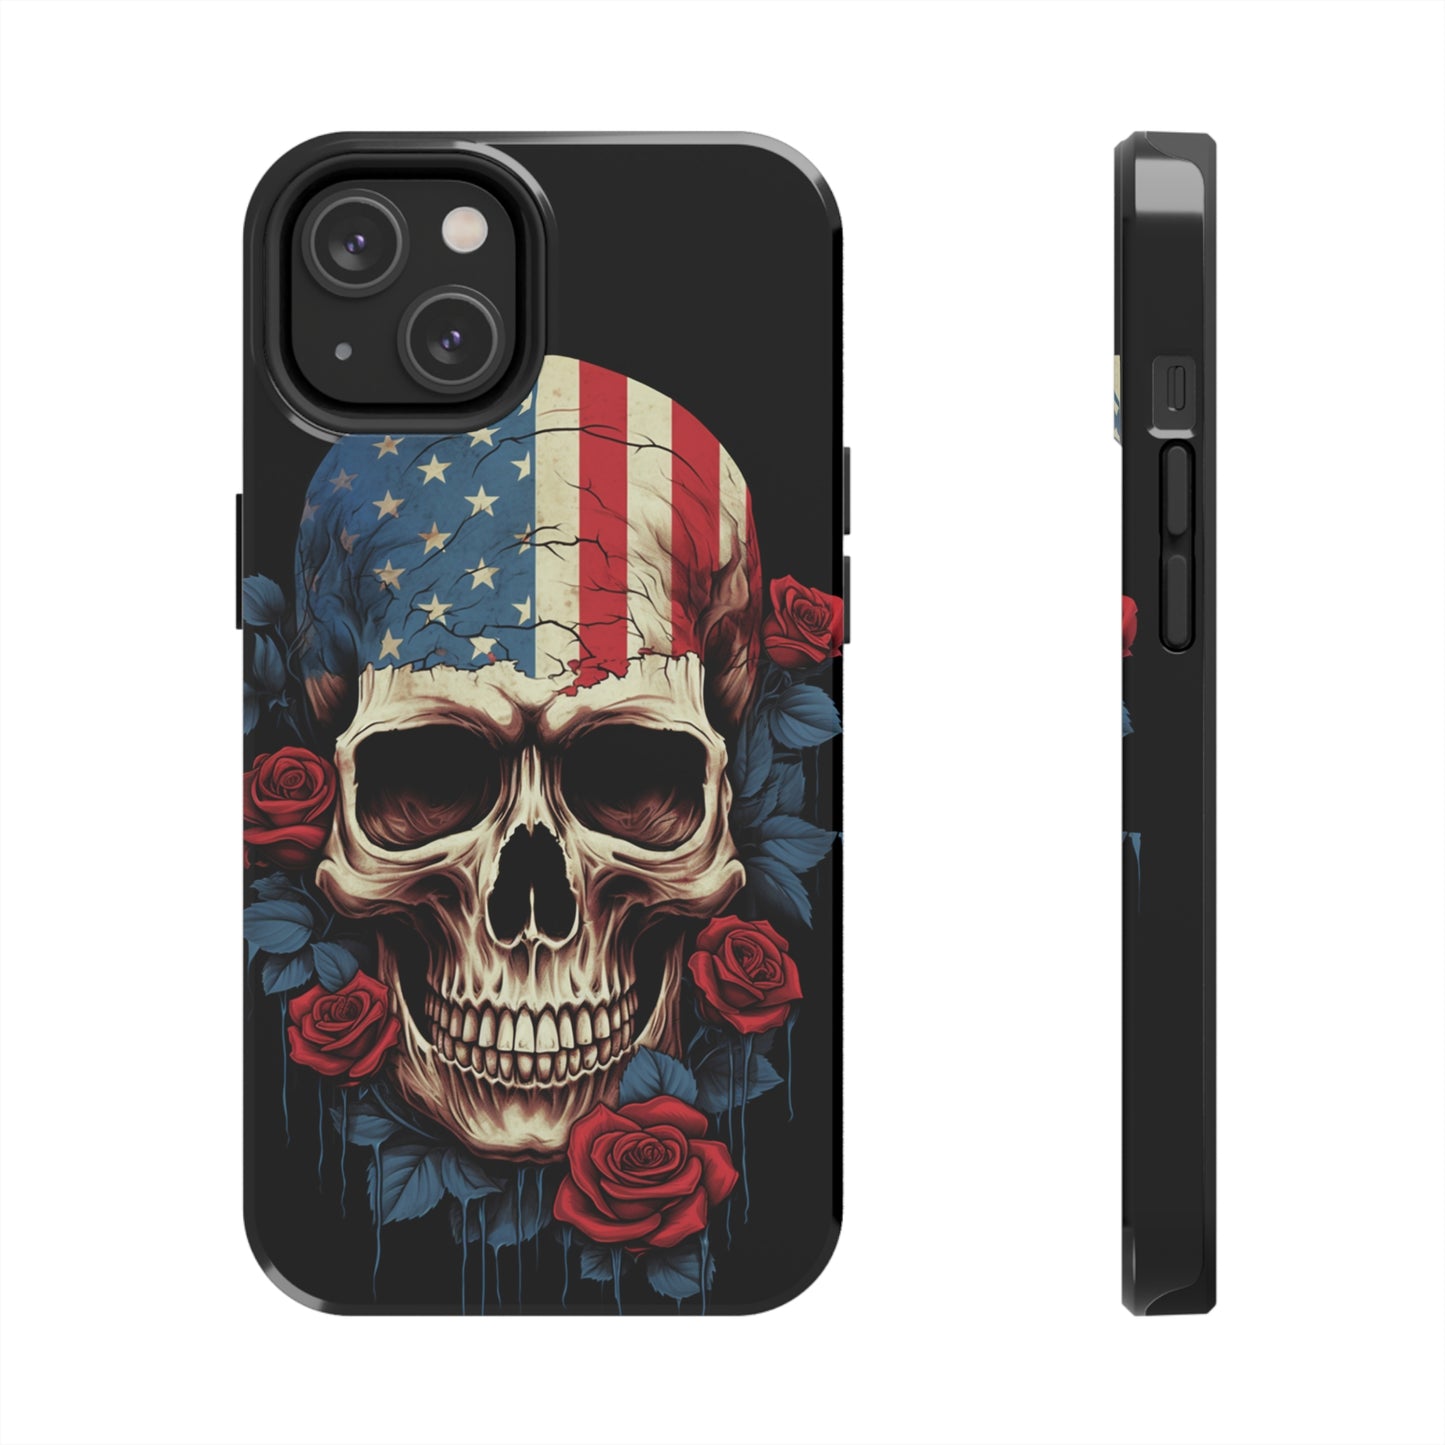 iPhone 12 Pro Max case blending American flag with skull